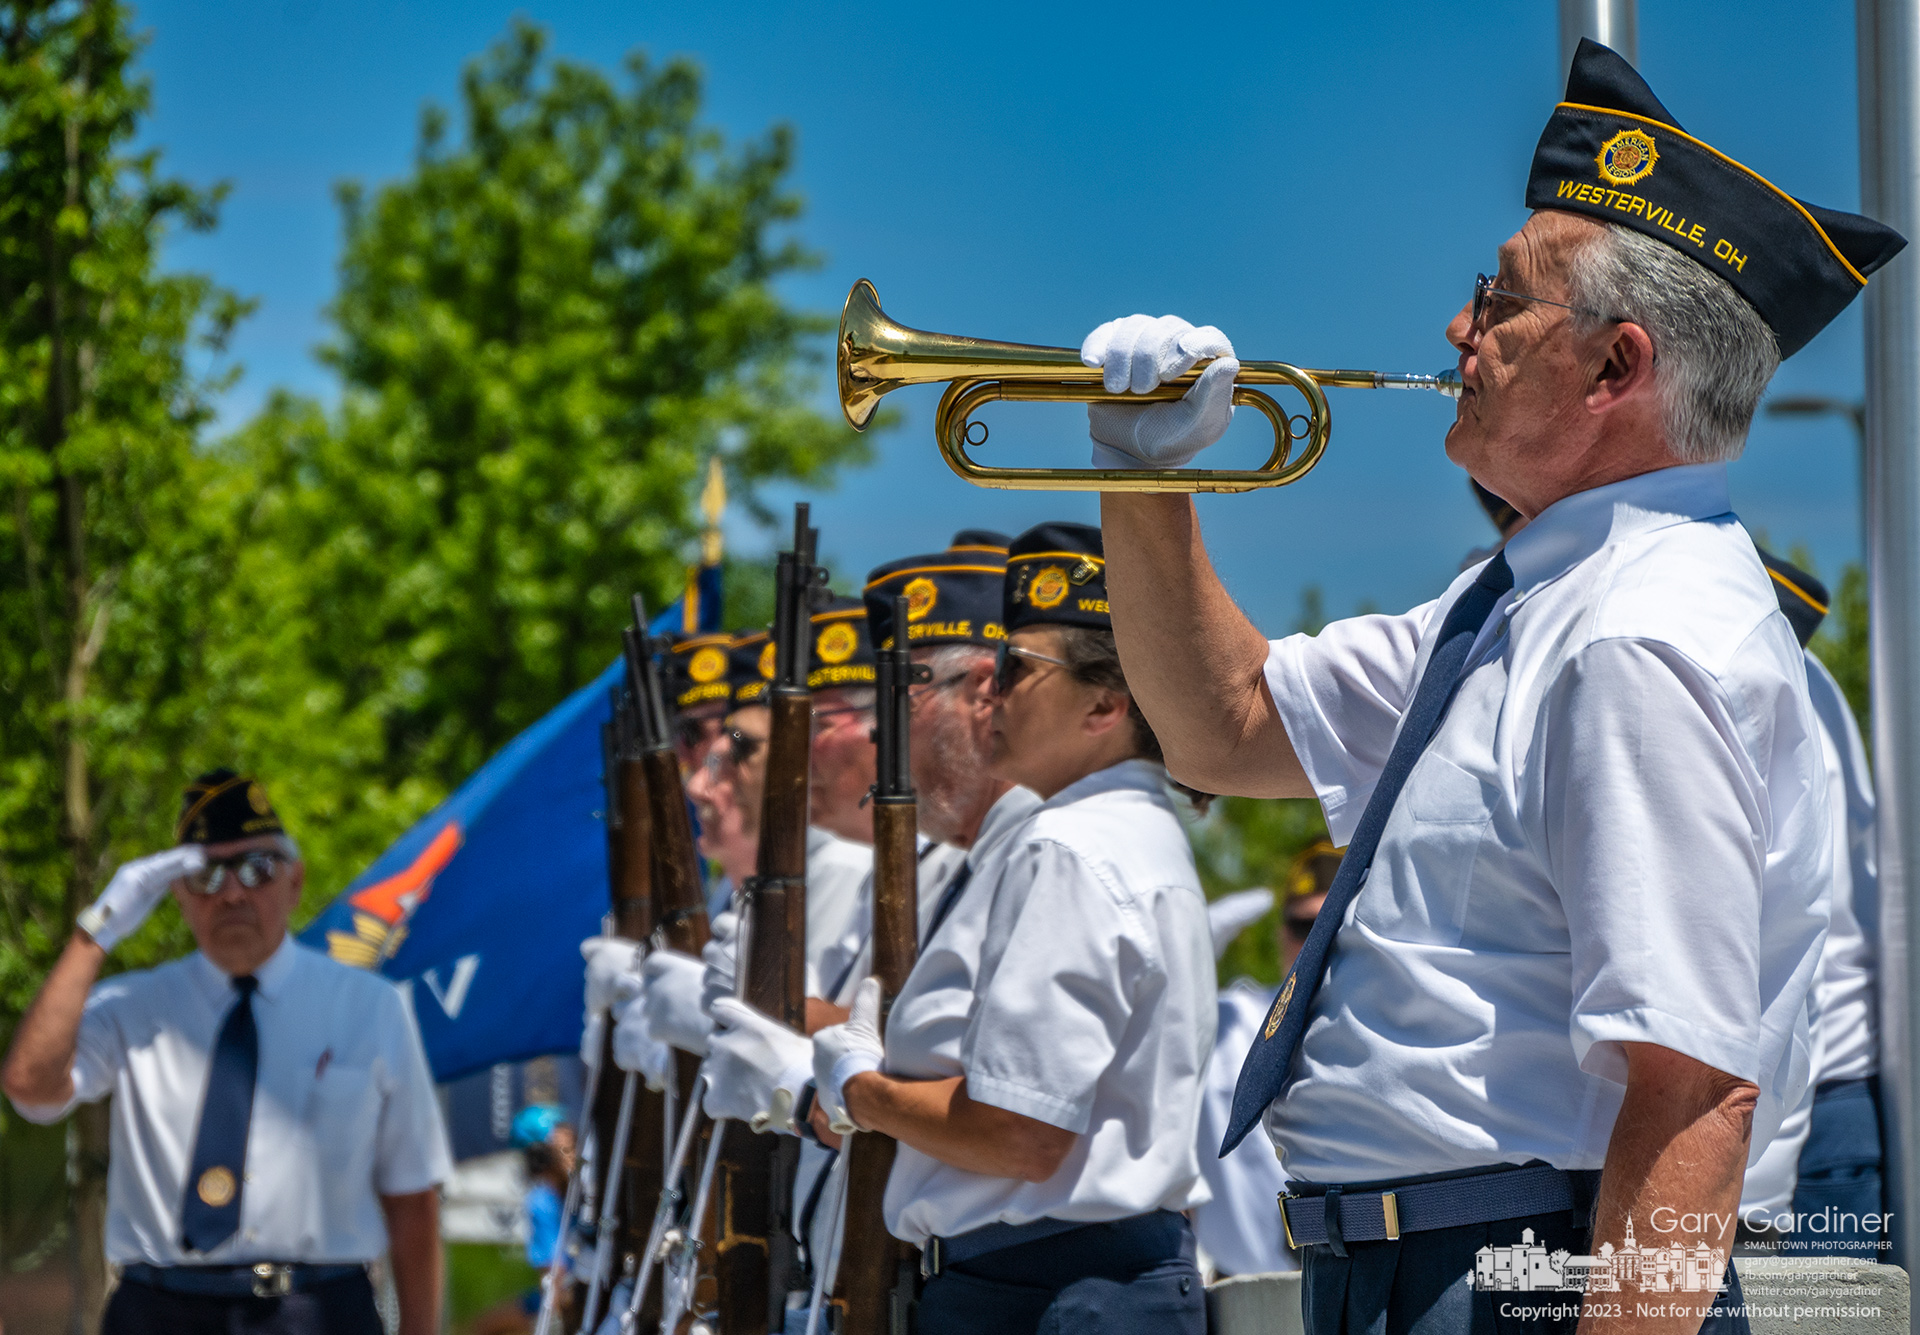 At the new Westerville Veterans Memorial, an American Legion bugler concludes the ceremonies closing the 'Field of Heroes' on Memorial Day by playing 'Taps'. My Final Photo for May 29, 2023.